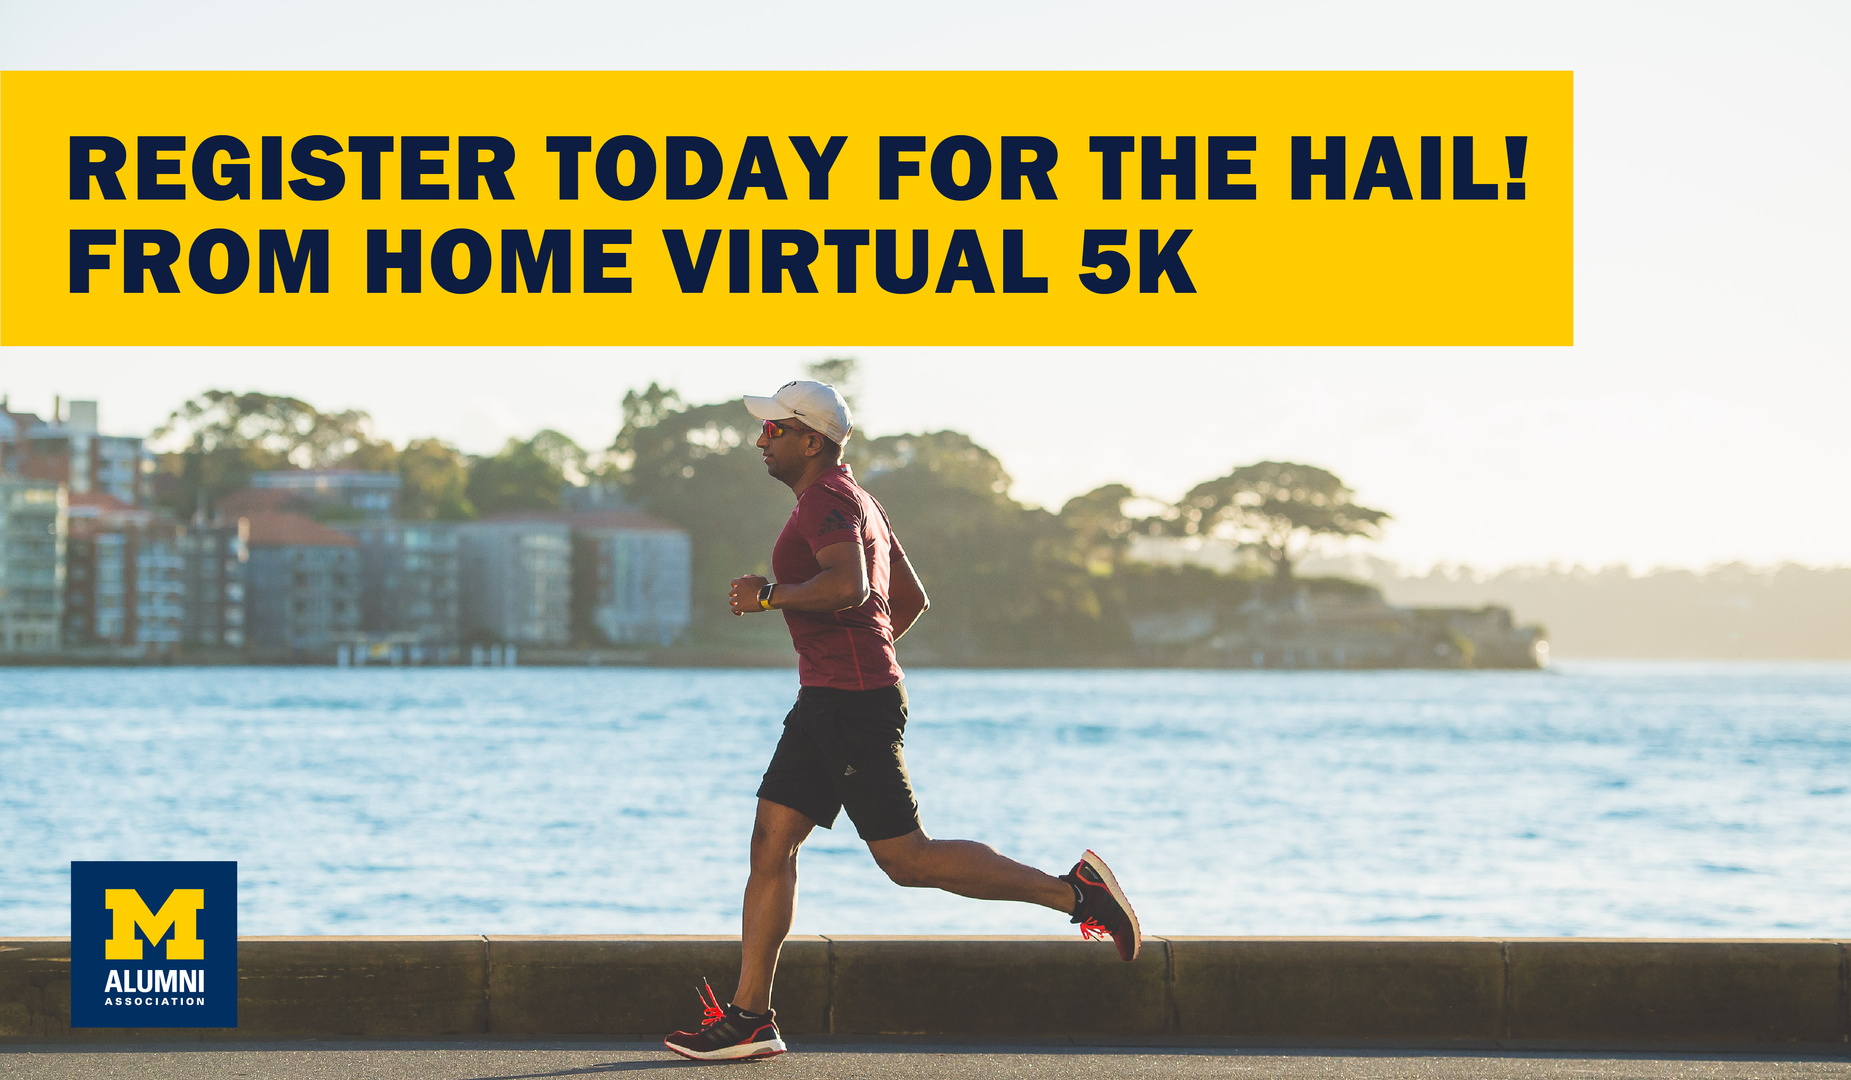 Hail! From Home Virtual 5K (in partnership with Alumni Association of the University of Michigan), Virtual Event, United States